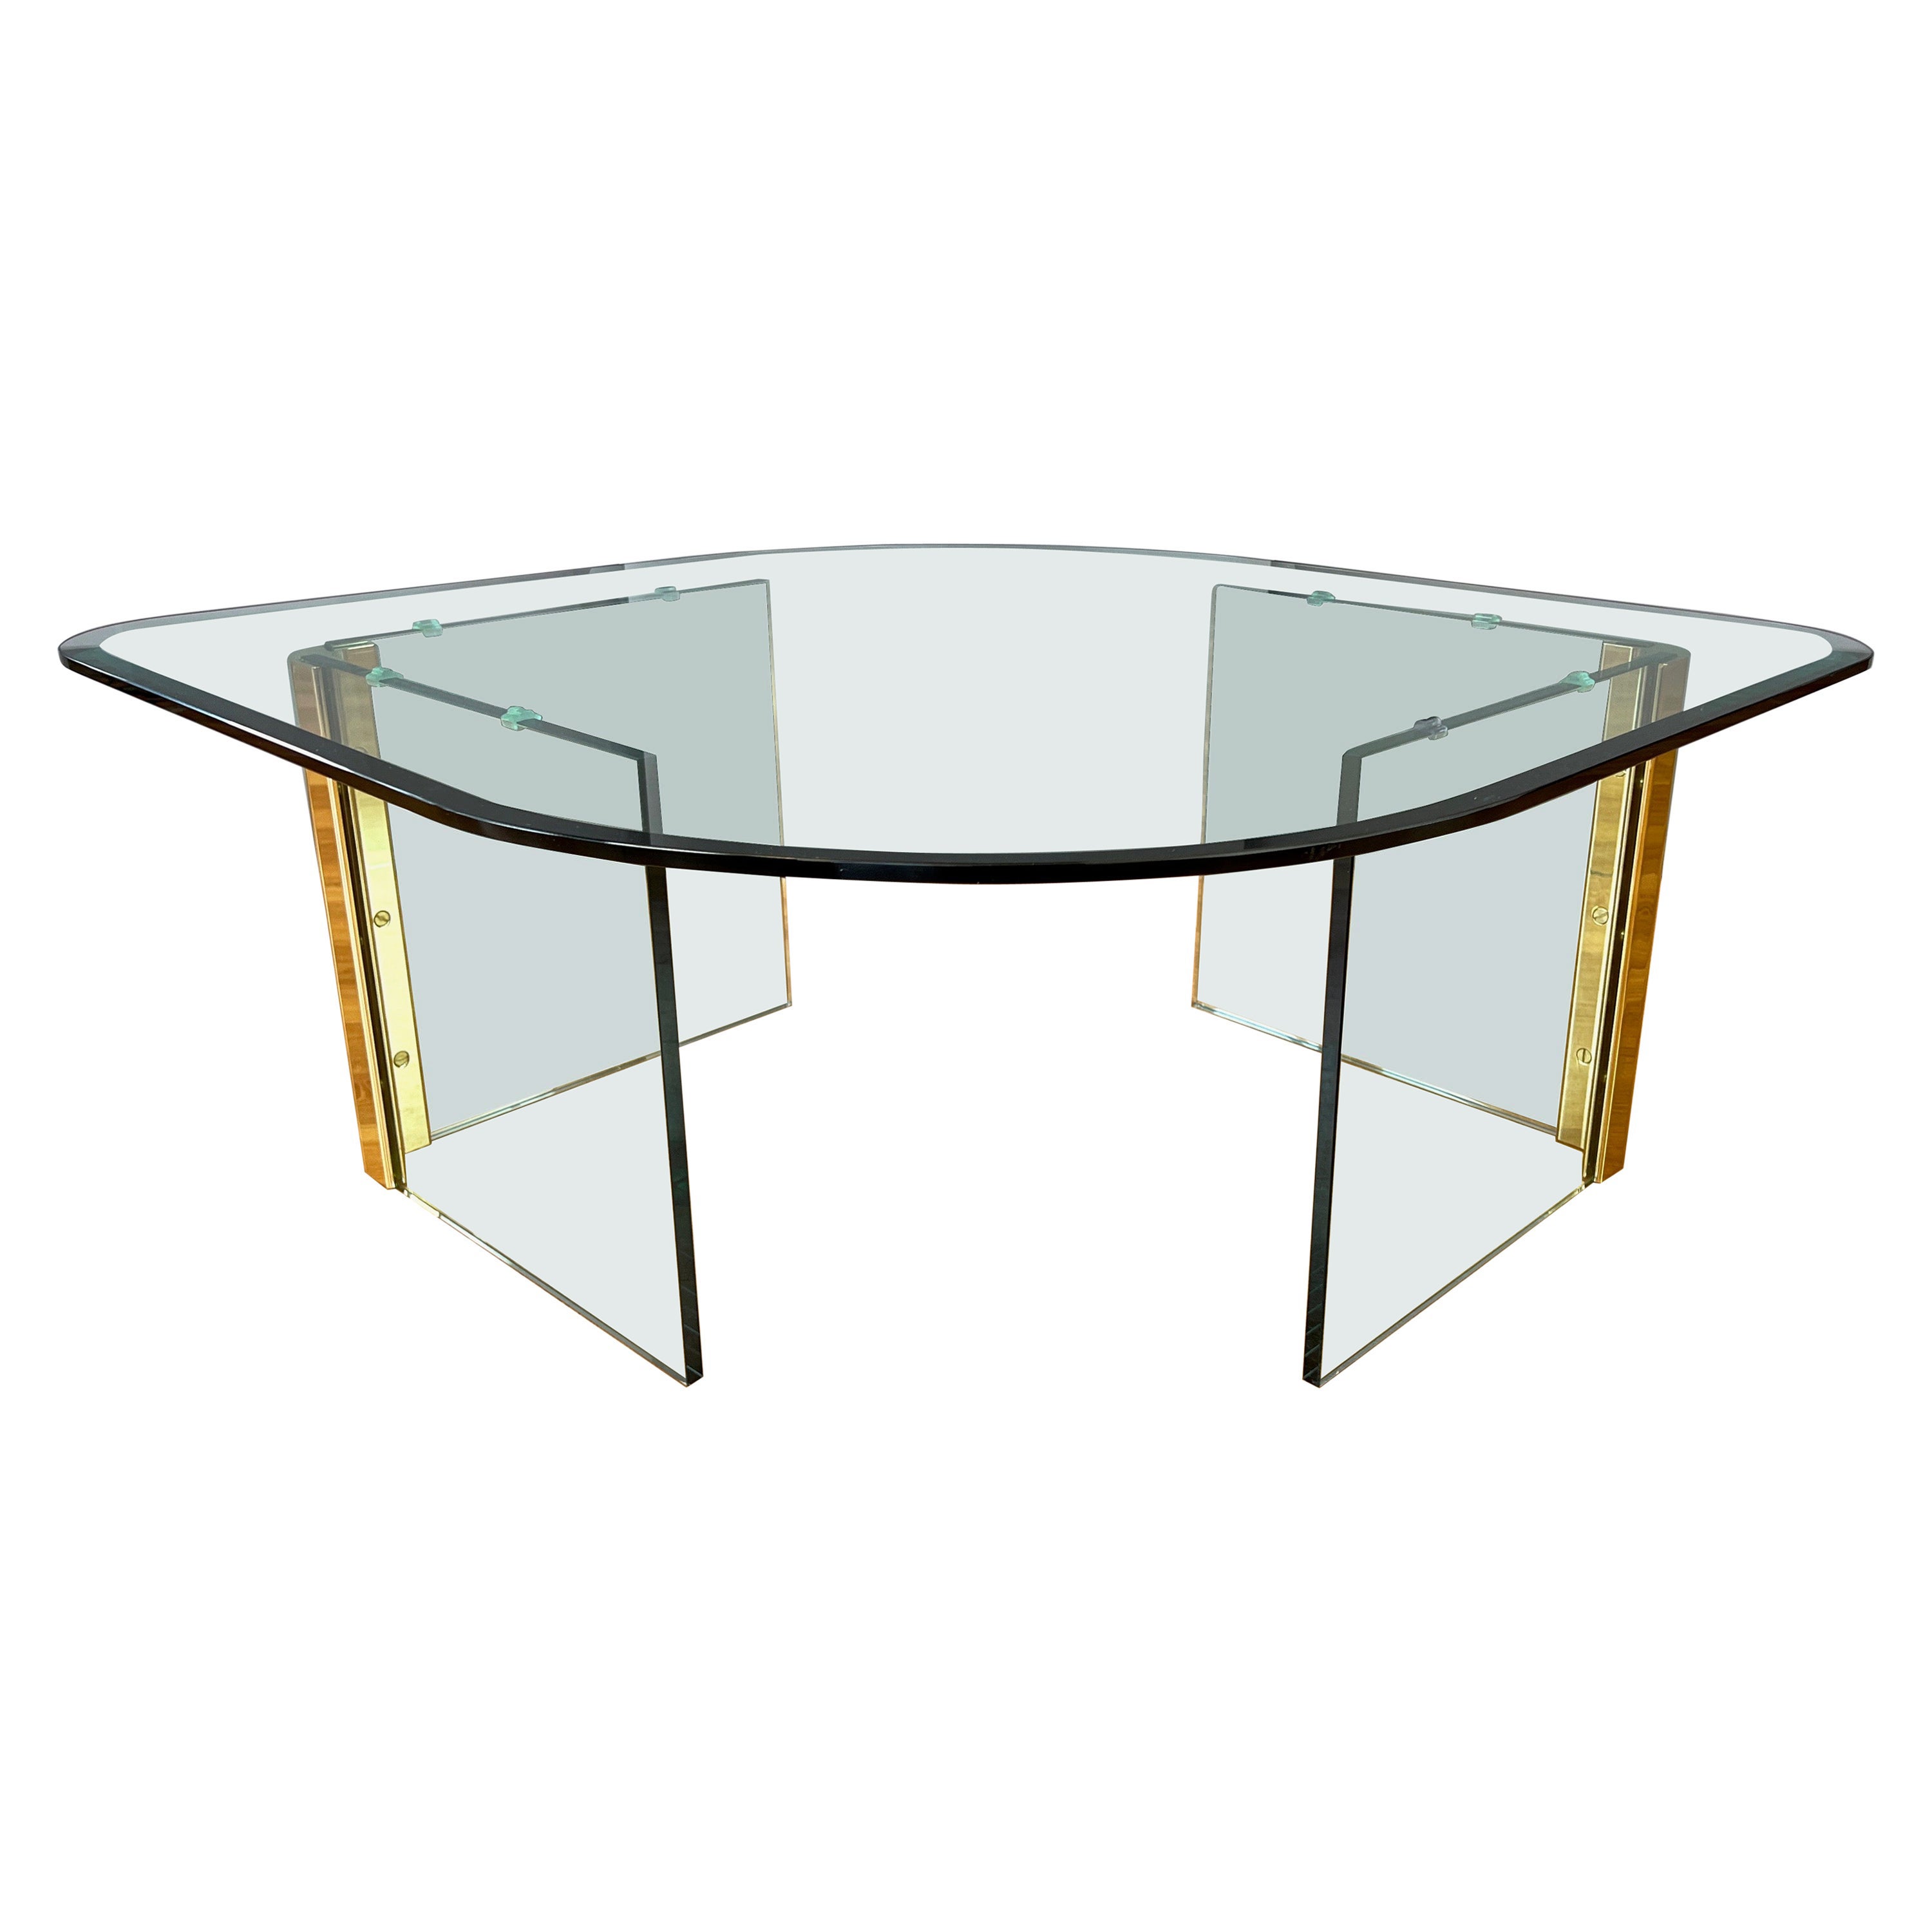 Leon Rosen for The Pace Collection Brass and Glass Coffee Table, 1970s For Sale